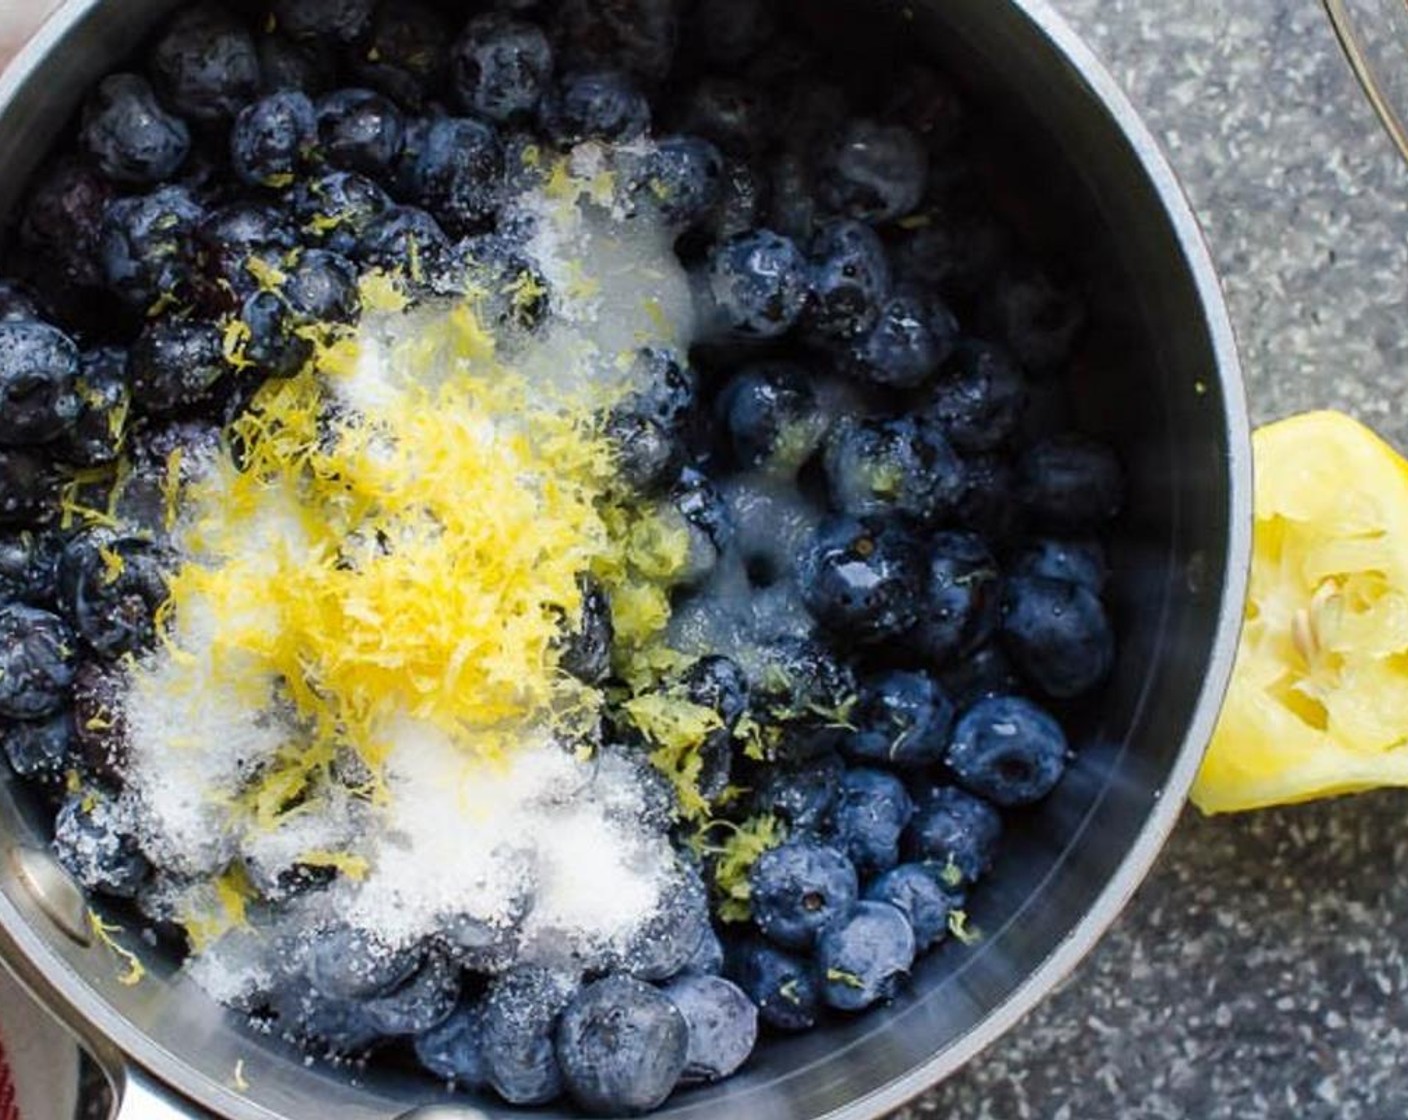 step 5 In a small saucepan add the Fresh Blueberries (2 1/2 cups), Granulated Sugar (1/4 cup), zest and juice from Lemon (1). Stir and heat over medium-high heat, stirring occasionally until sugar dissolves and mixture starts to bubble.